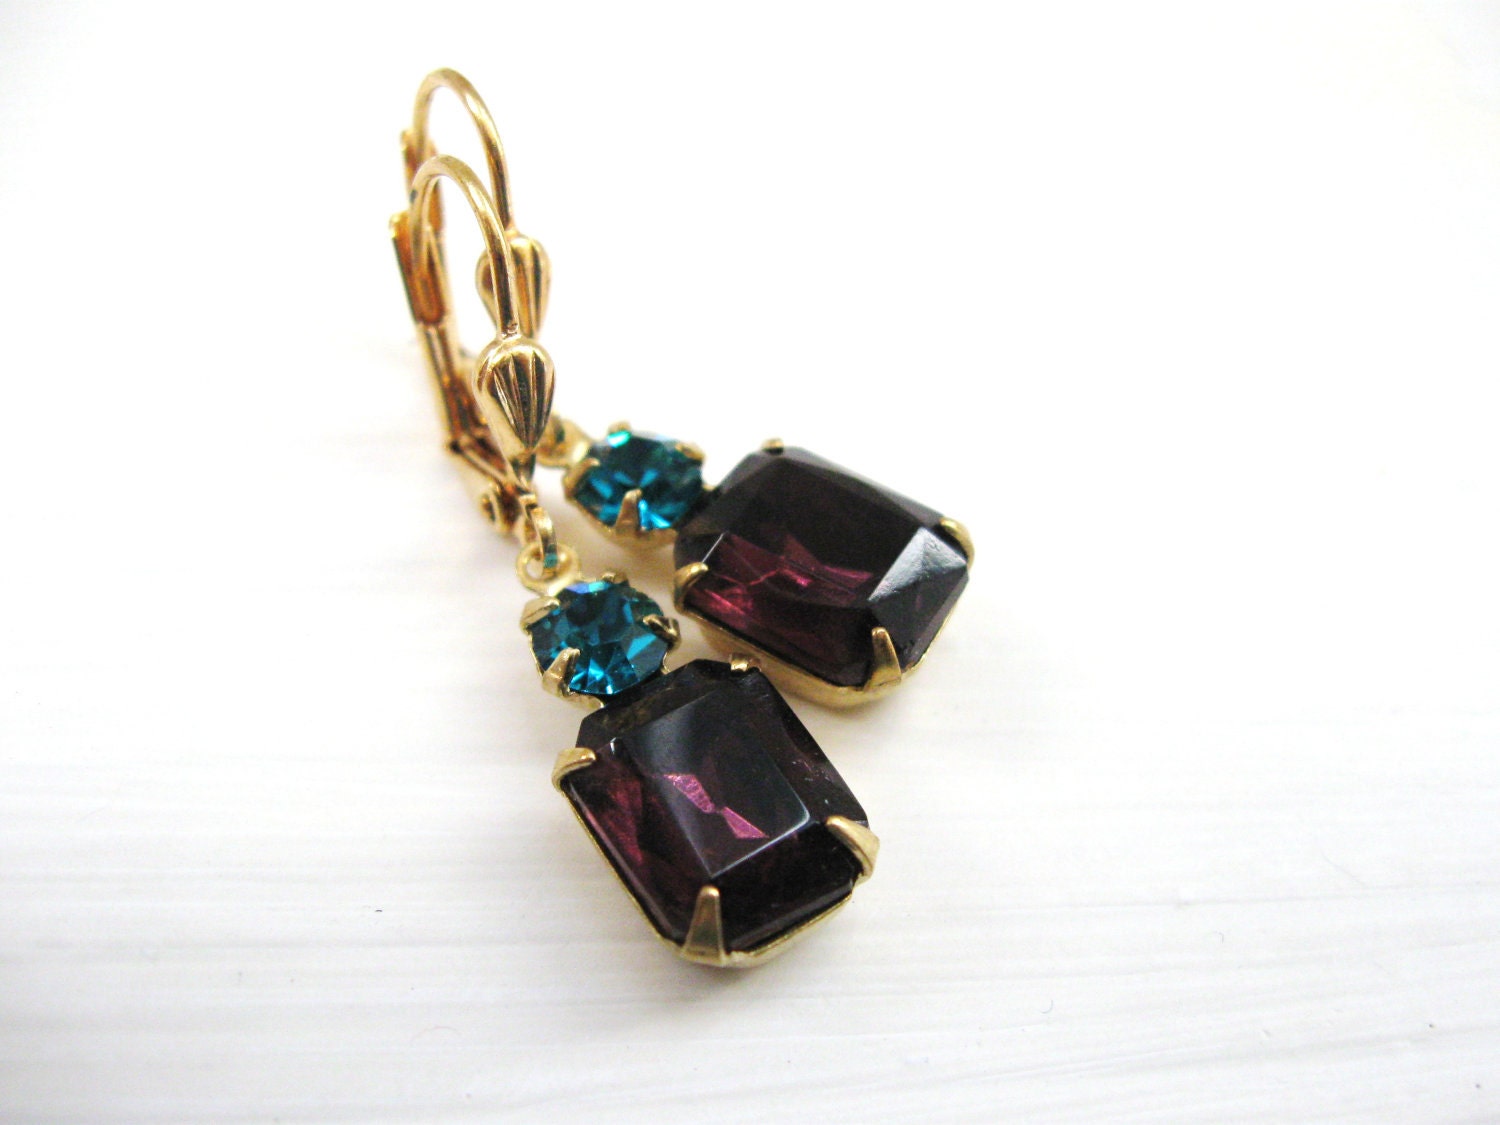 Violet and Teal Glass Jewels in Brass  - Estate Jewelry - Wedding Bridal Earrings